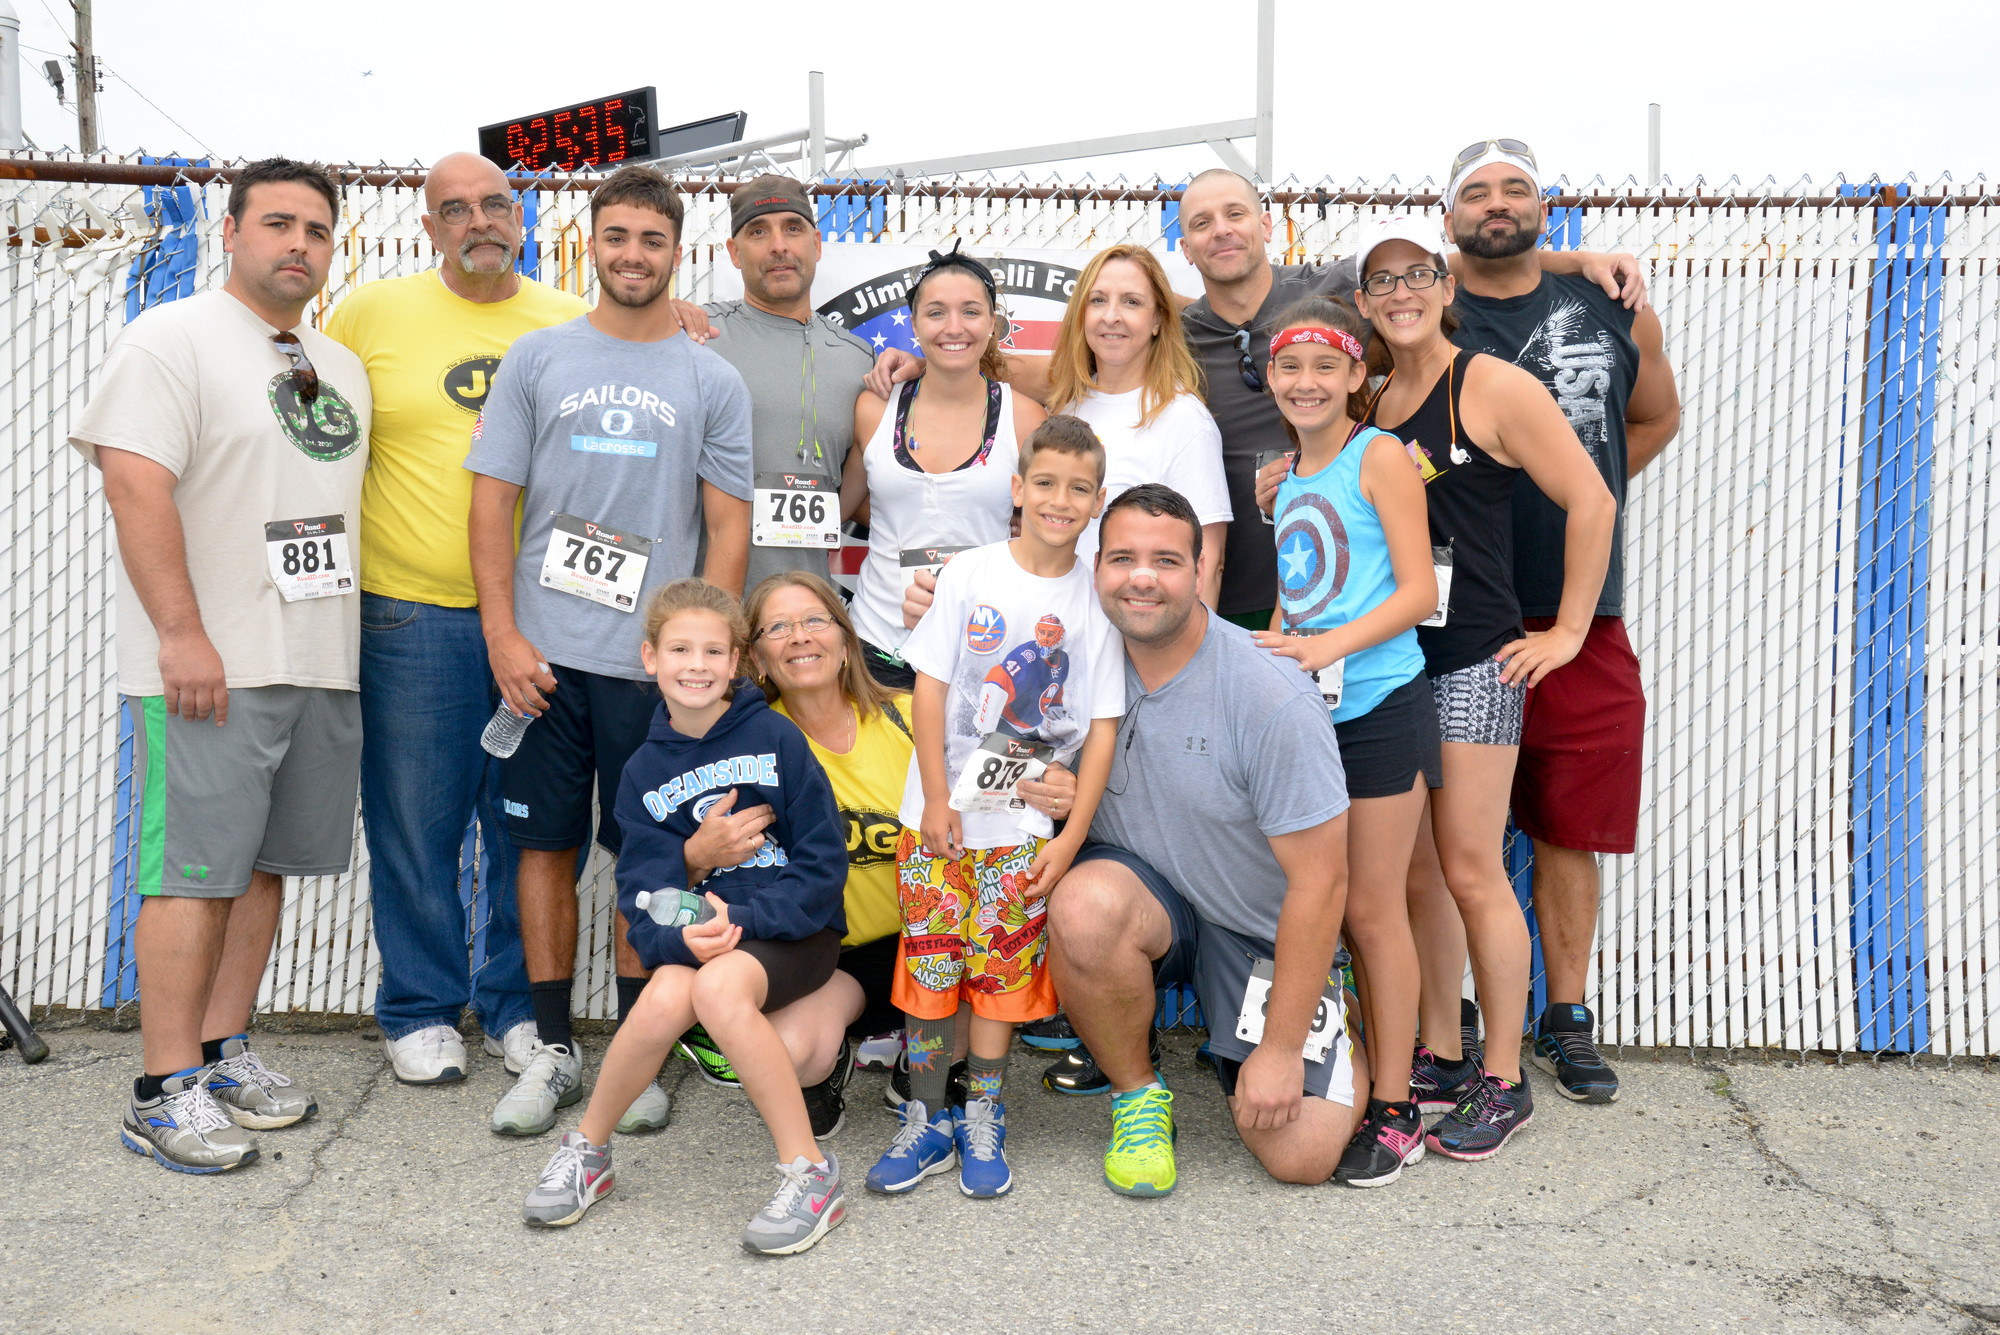 Gubelli family at the 2015 Race/Walk.